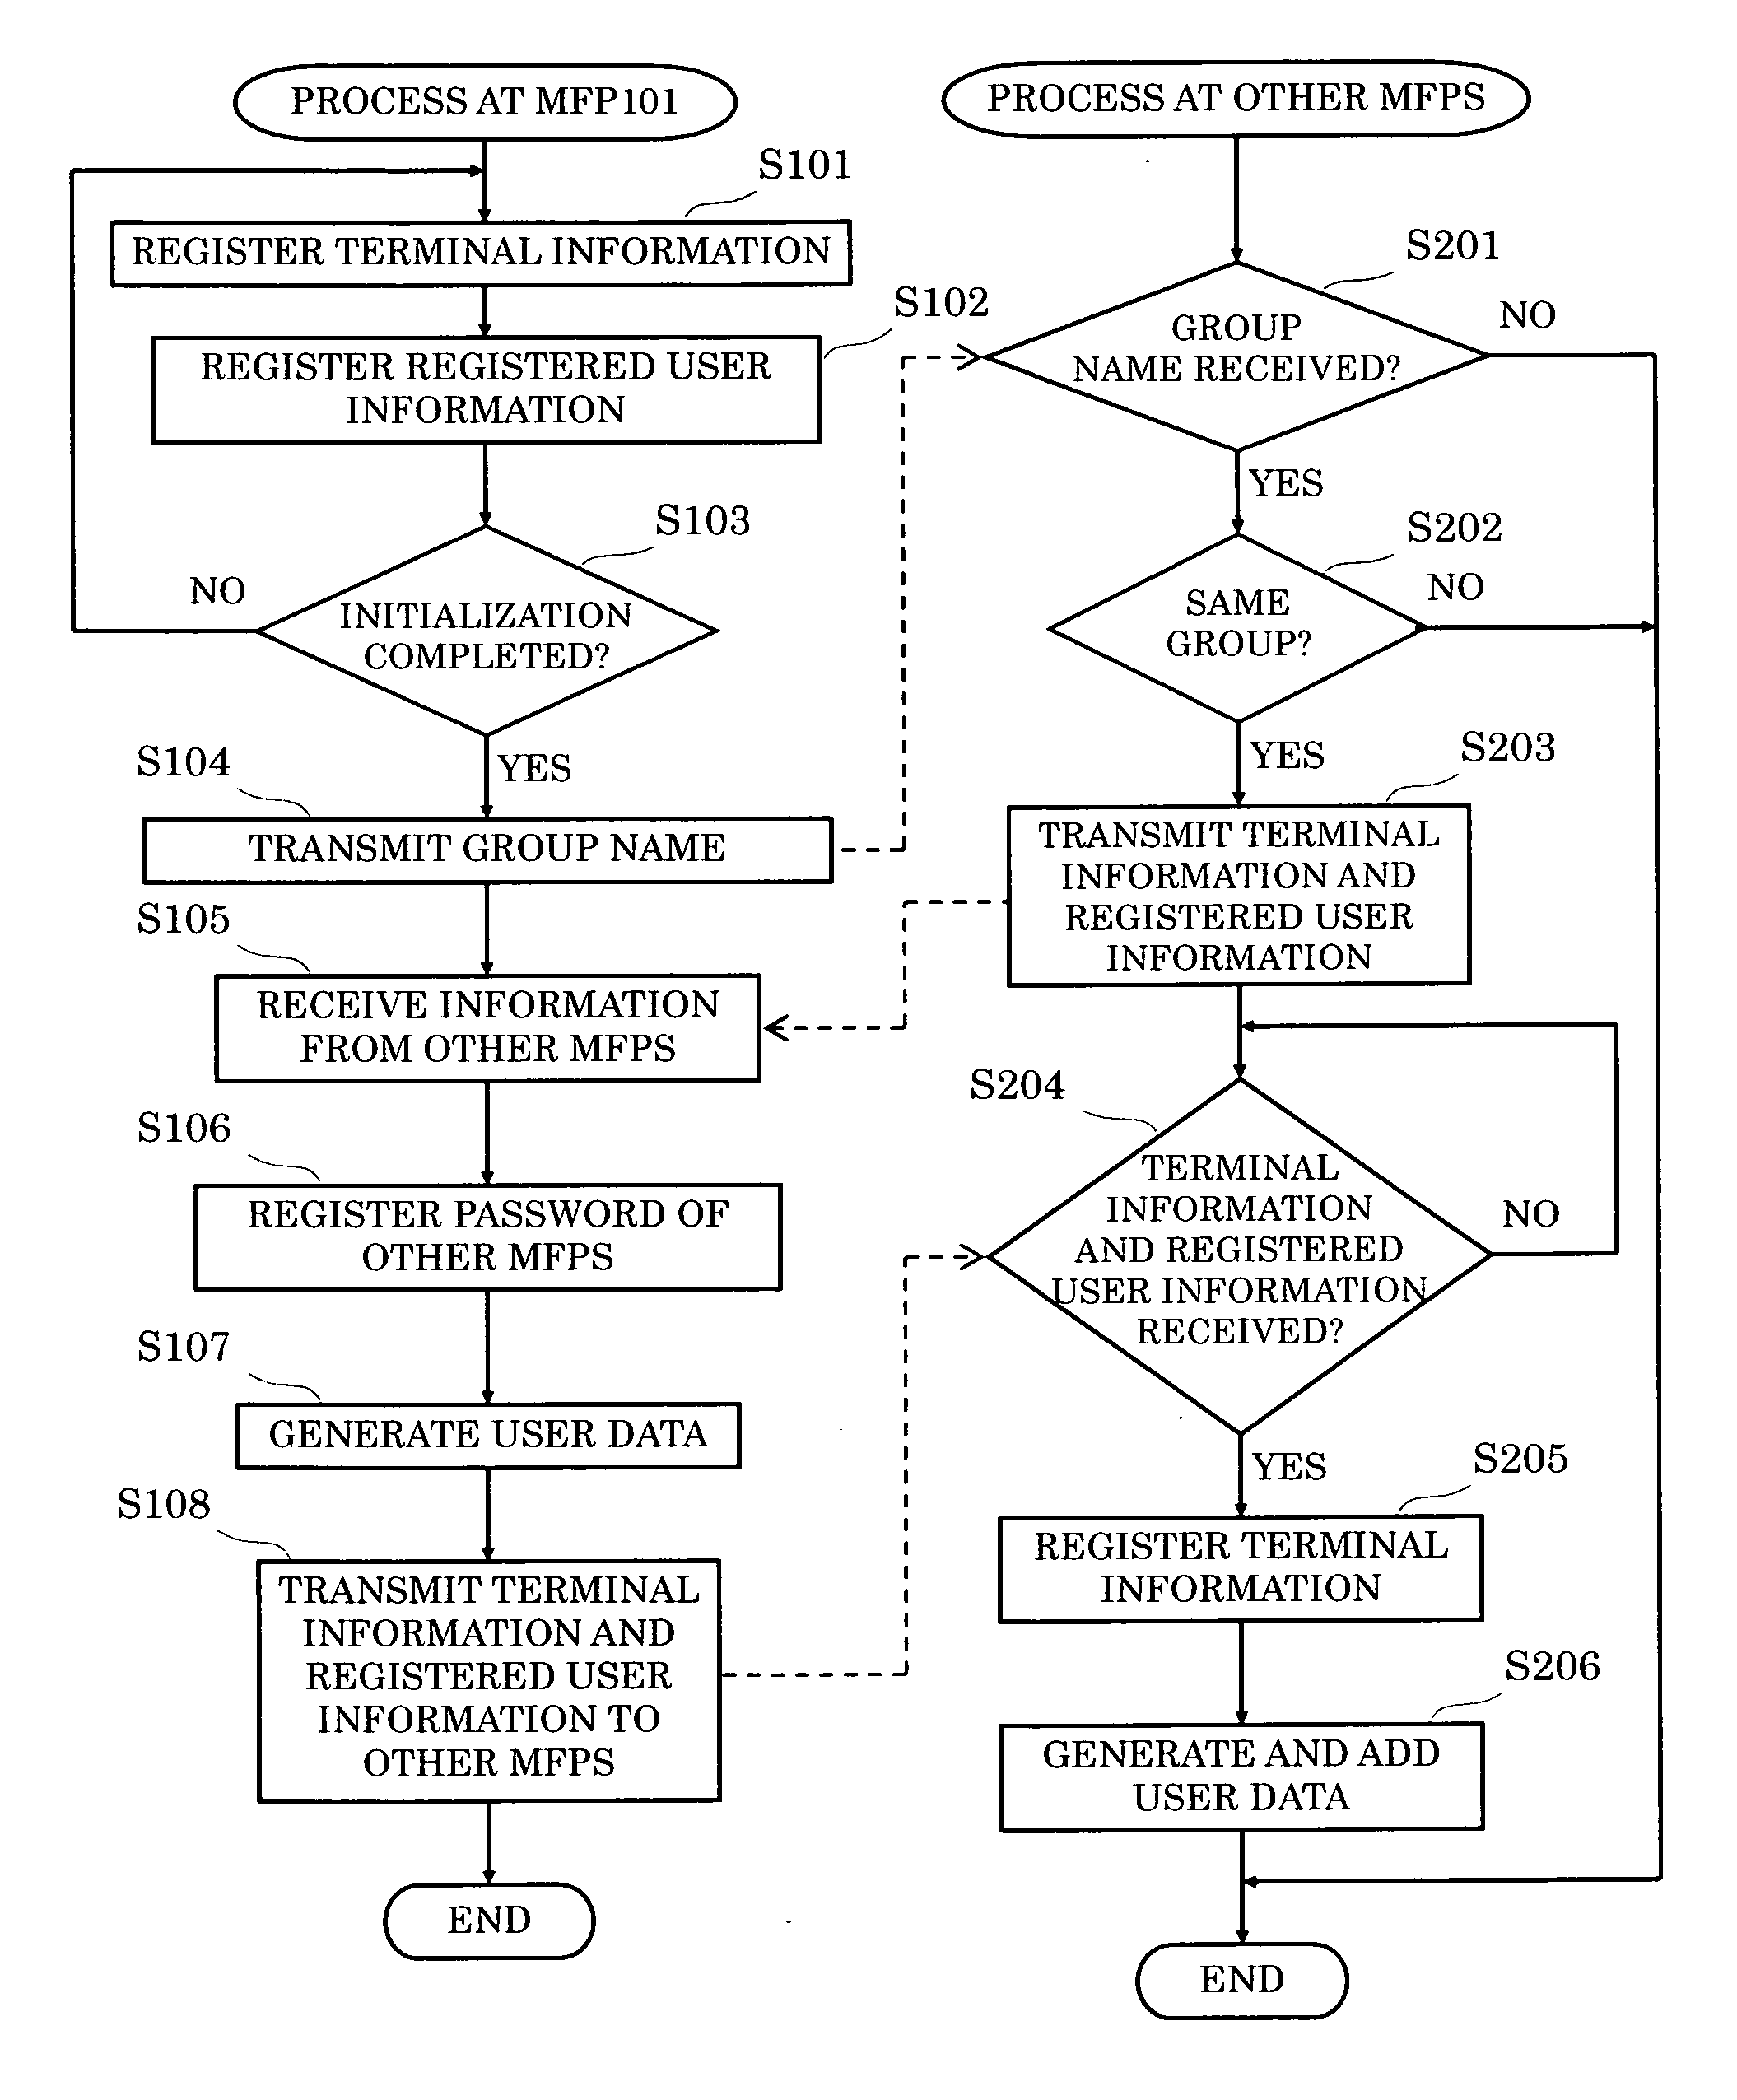 Image processing apparatus, image processing method, and recording medium having computer executable program stored therein